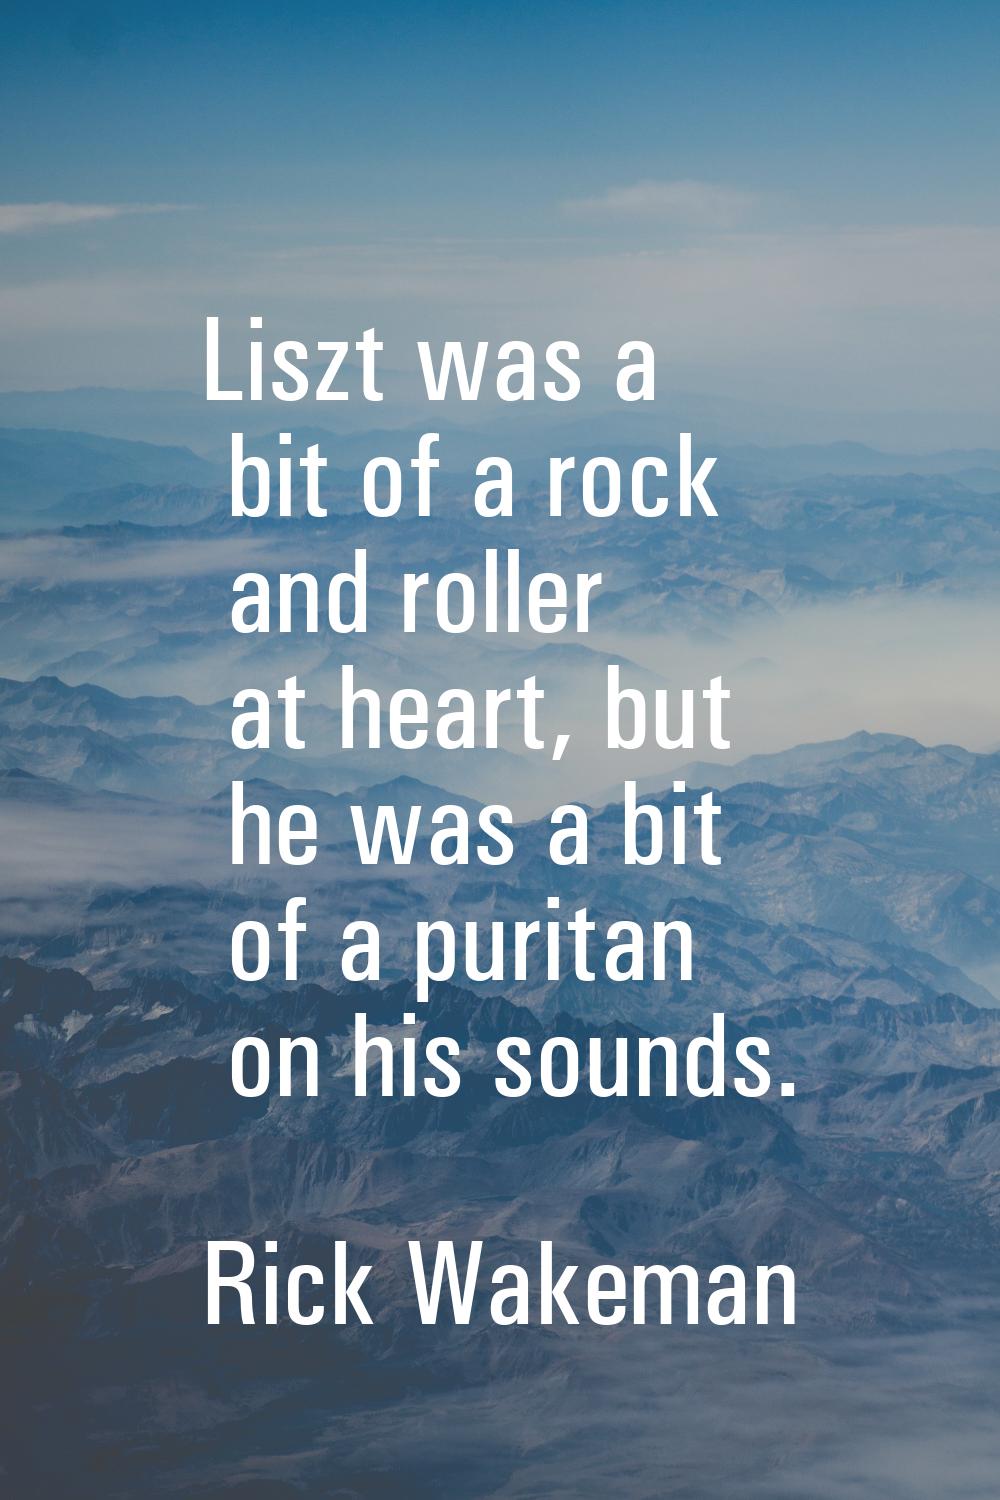 Liszt was a bit of a rock and roller at heart, but he was a bit of a puritan on his sounds.